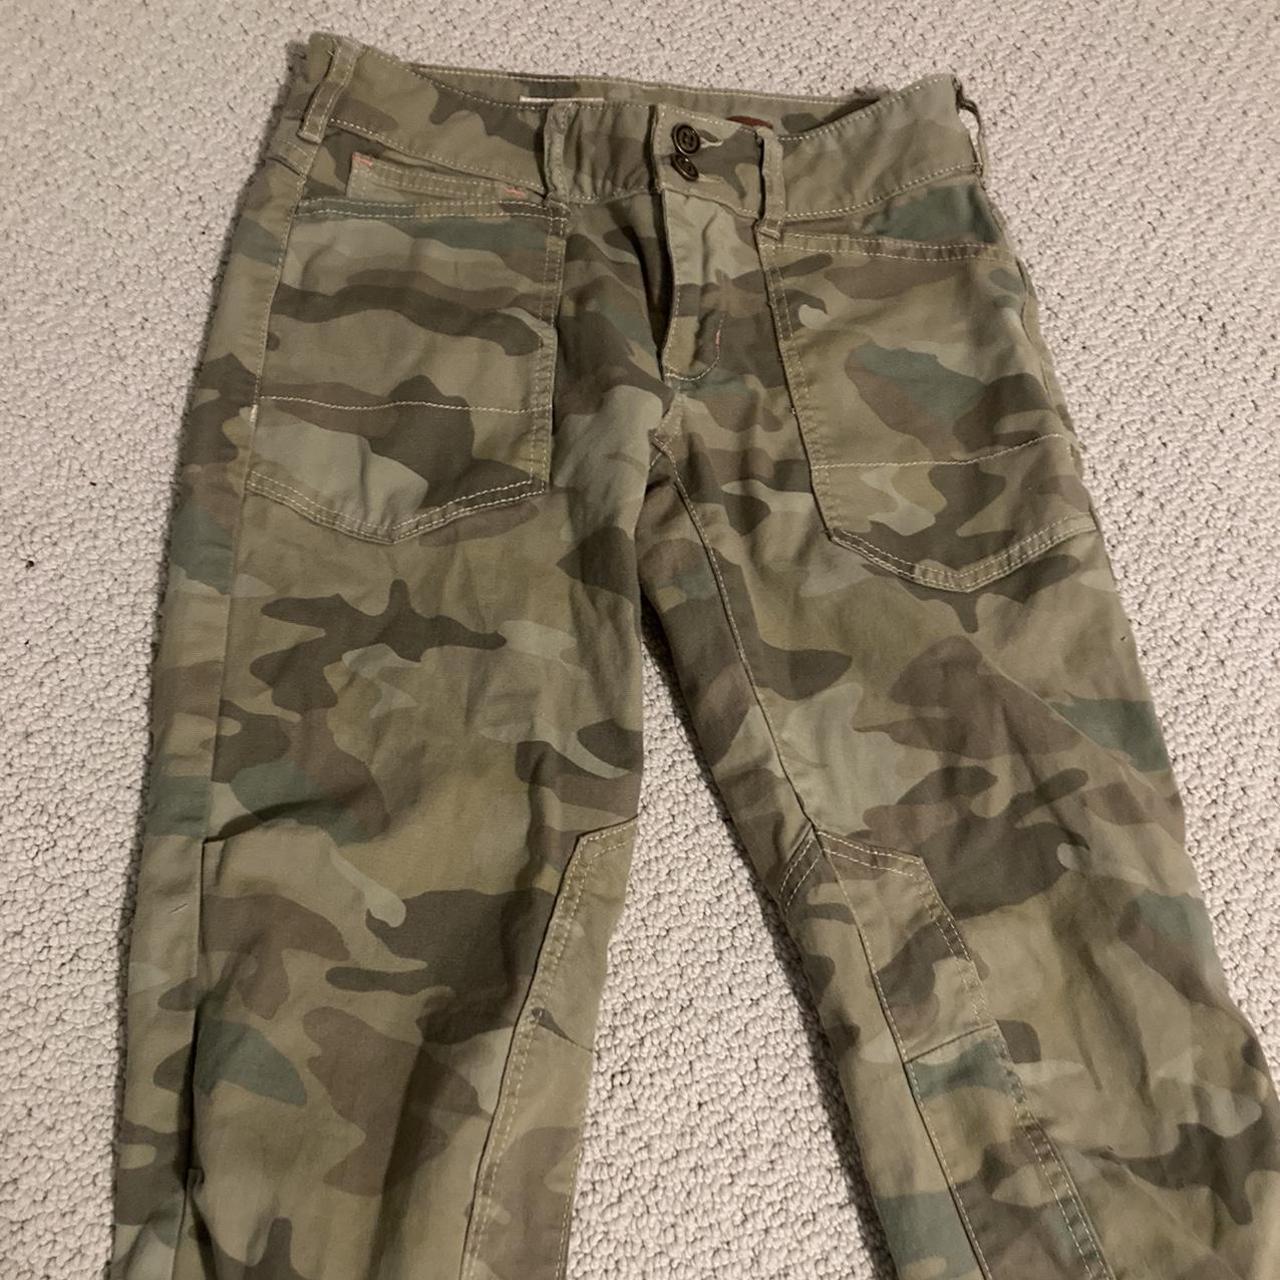 Pilcro mid rise camo pants with a pink detailing. - Depop